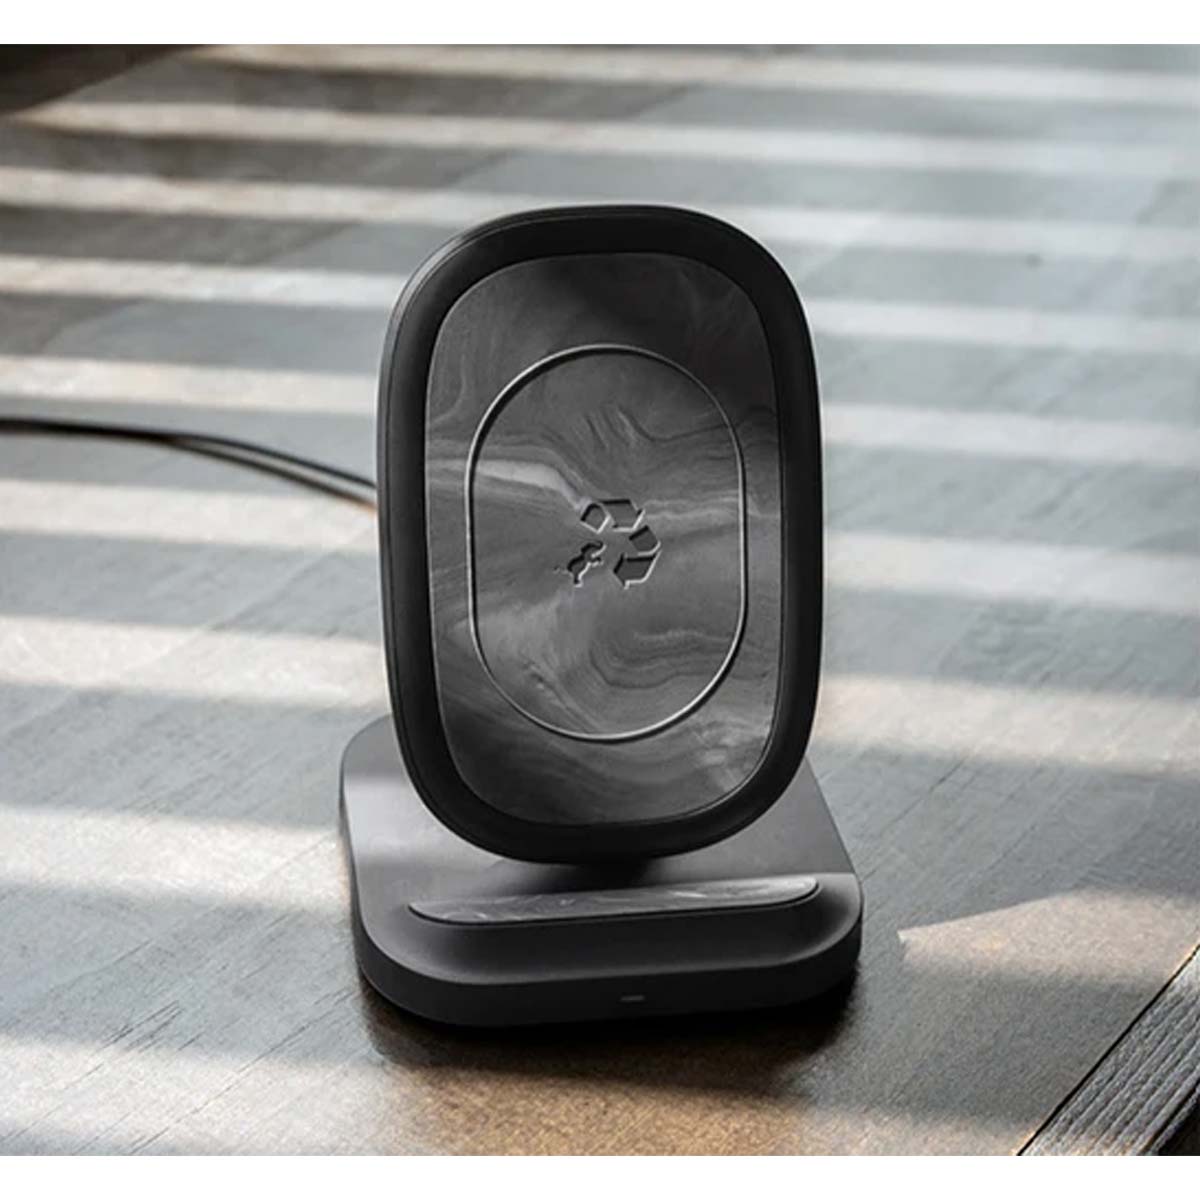 Nimble Recycled Wireless Charging Stand | 15 Watts